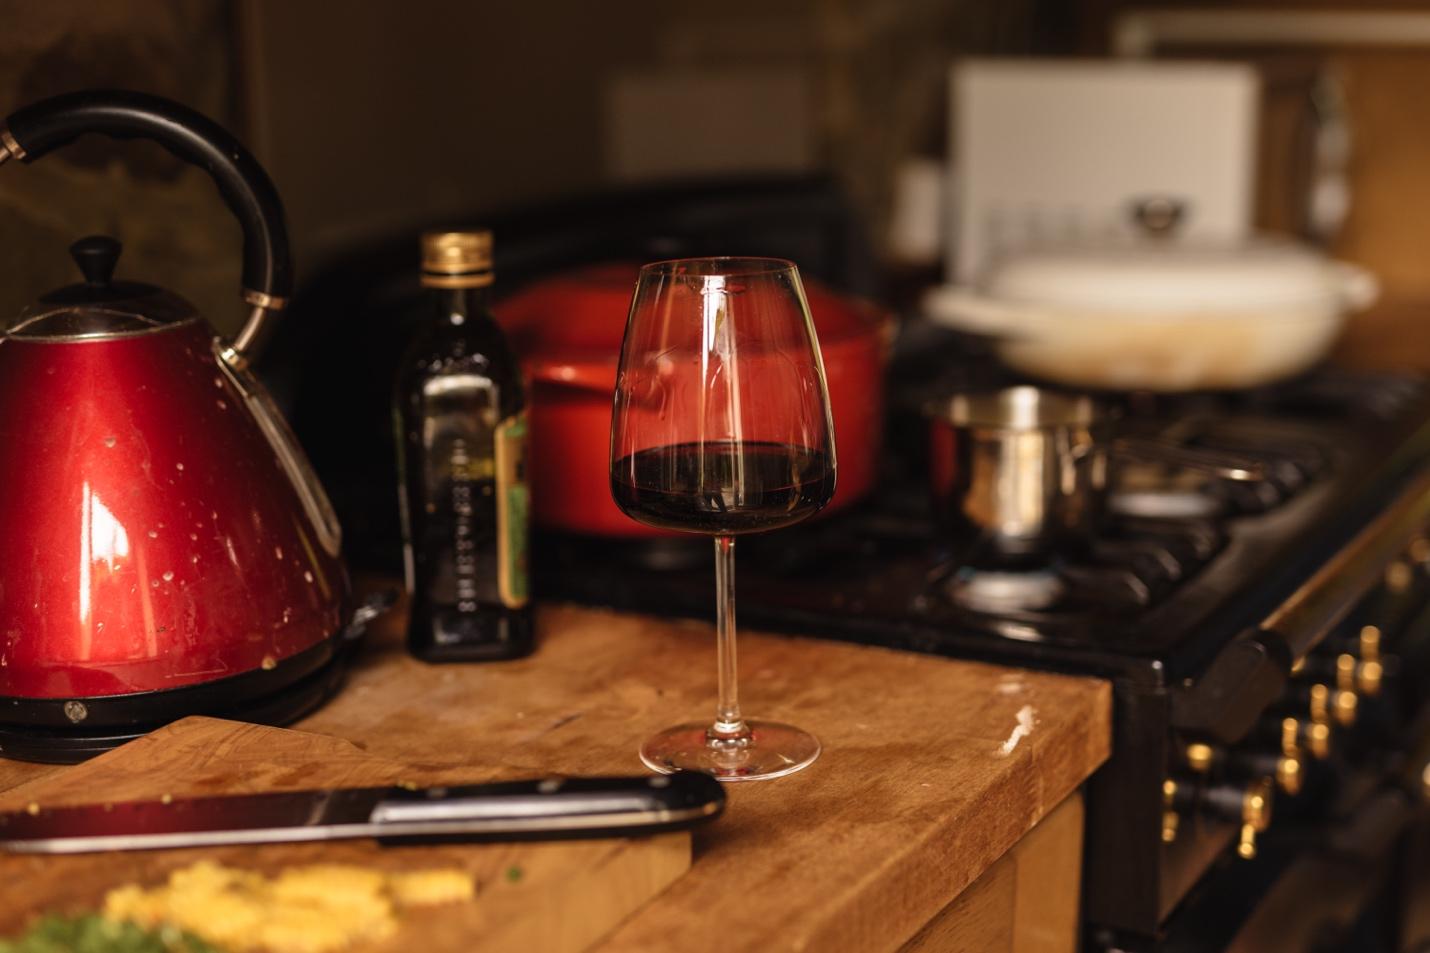 A glass of wine on a counter

Description automatically generated